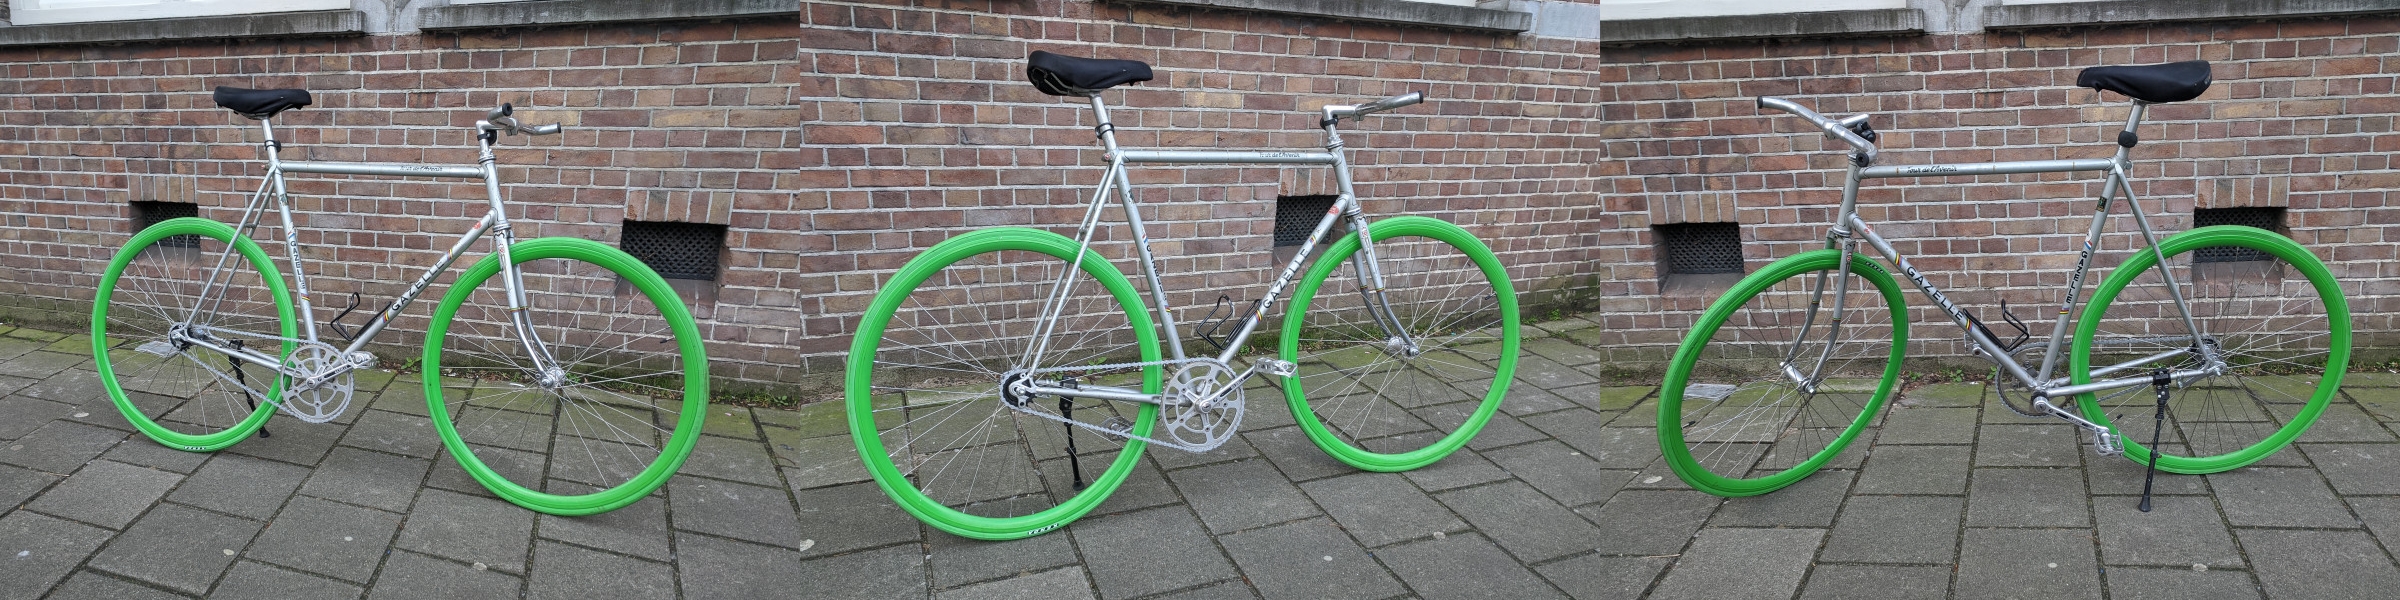 Racing bike with green tires from more angles